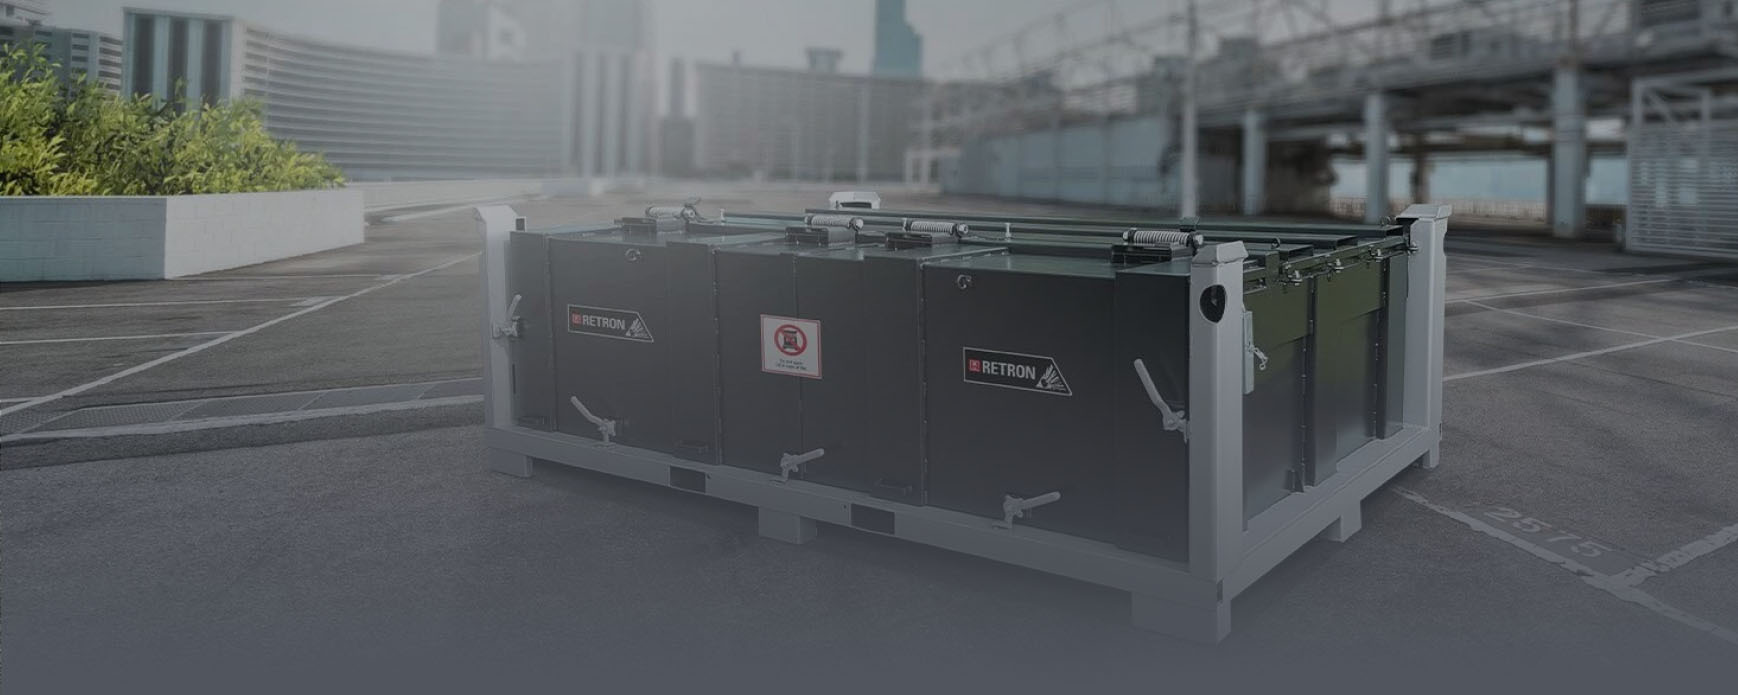 The container and disposal system for lithium-ion batteries is suitable for a wide range of industries